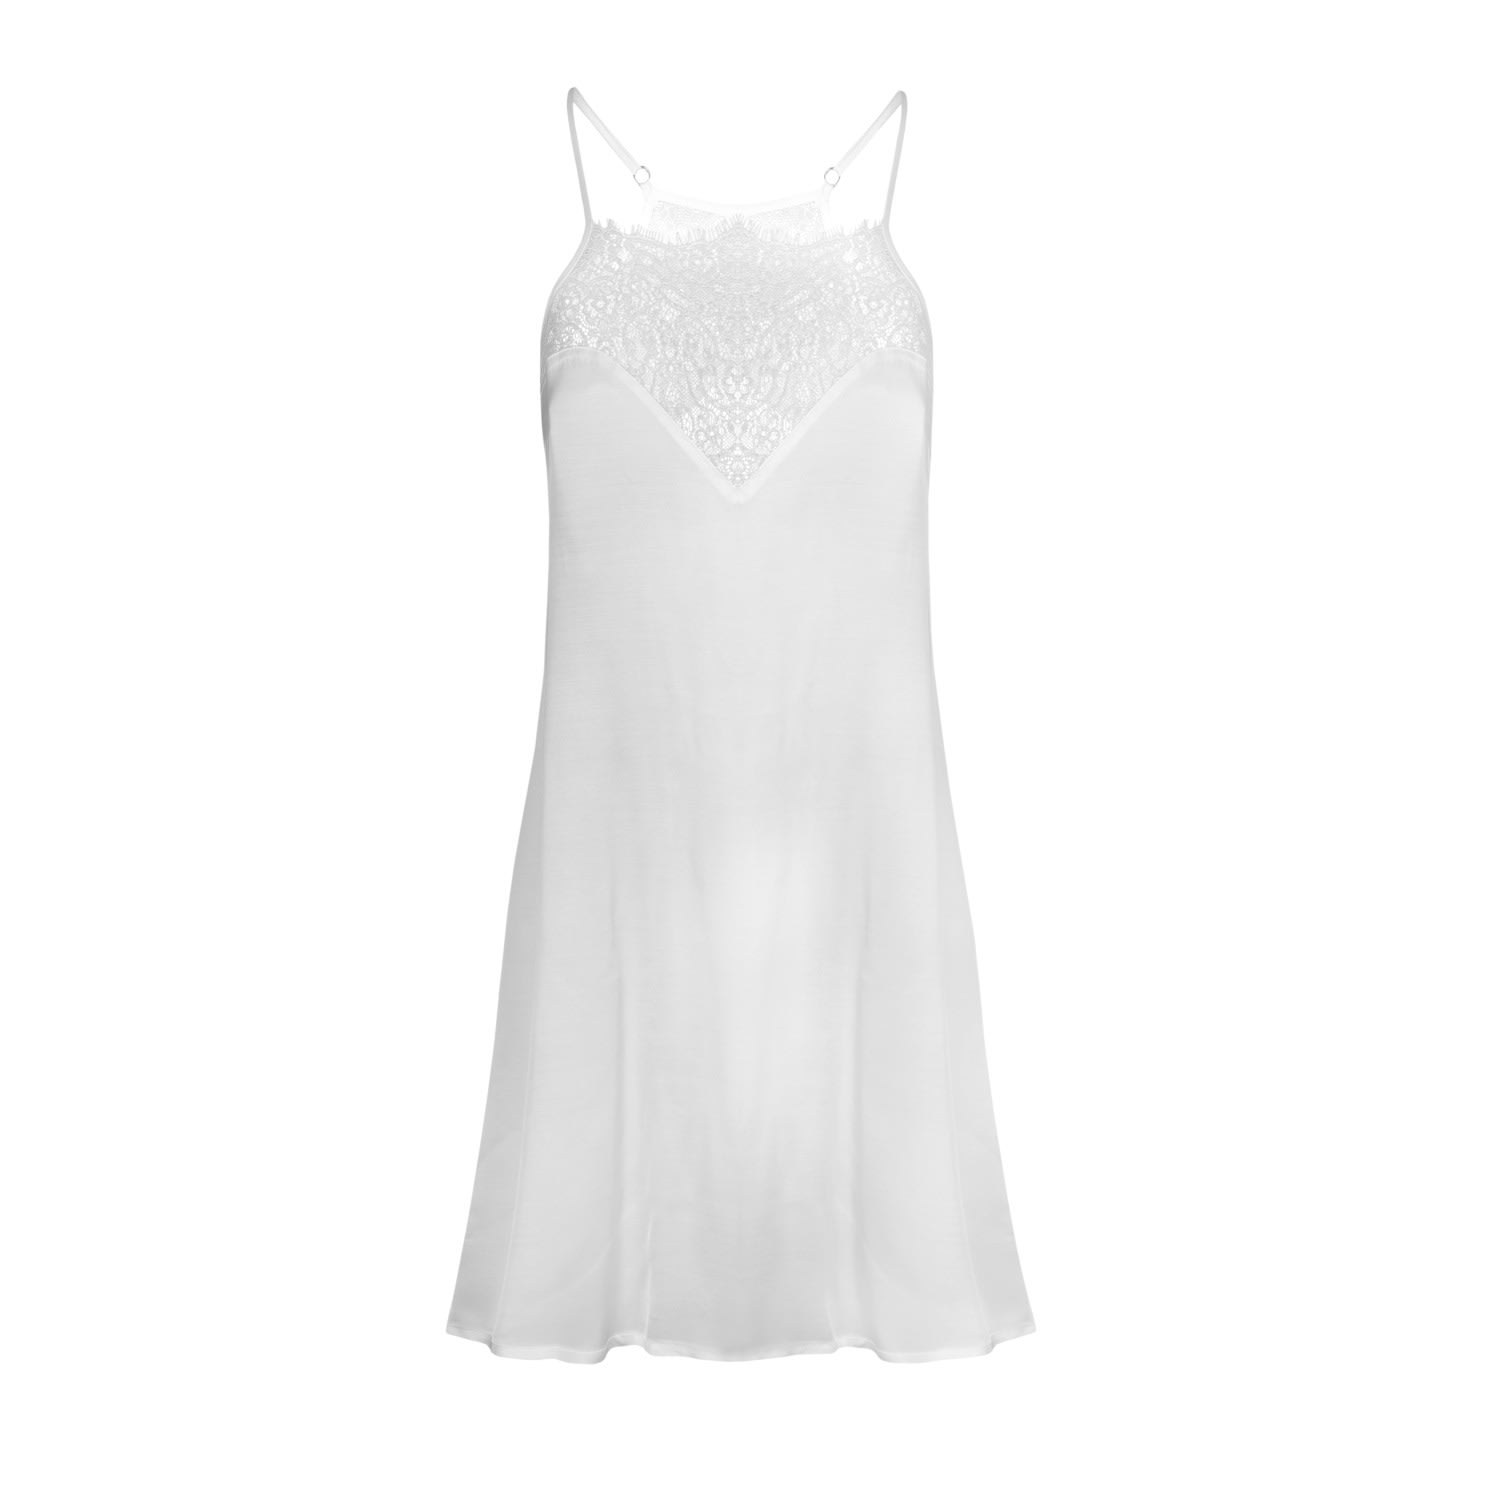 Women’s Chemise Nightdress - Viscose Satin & Delicate Lace - White Extra Small Oh!Zuza Night & Day